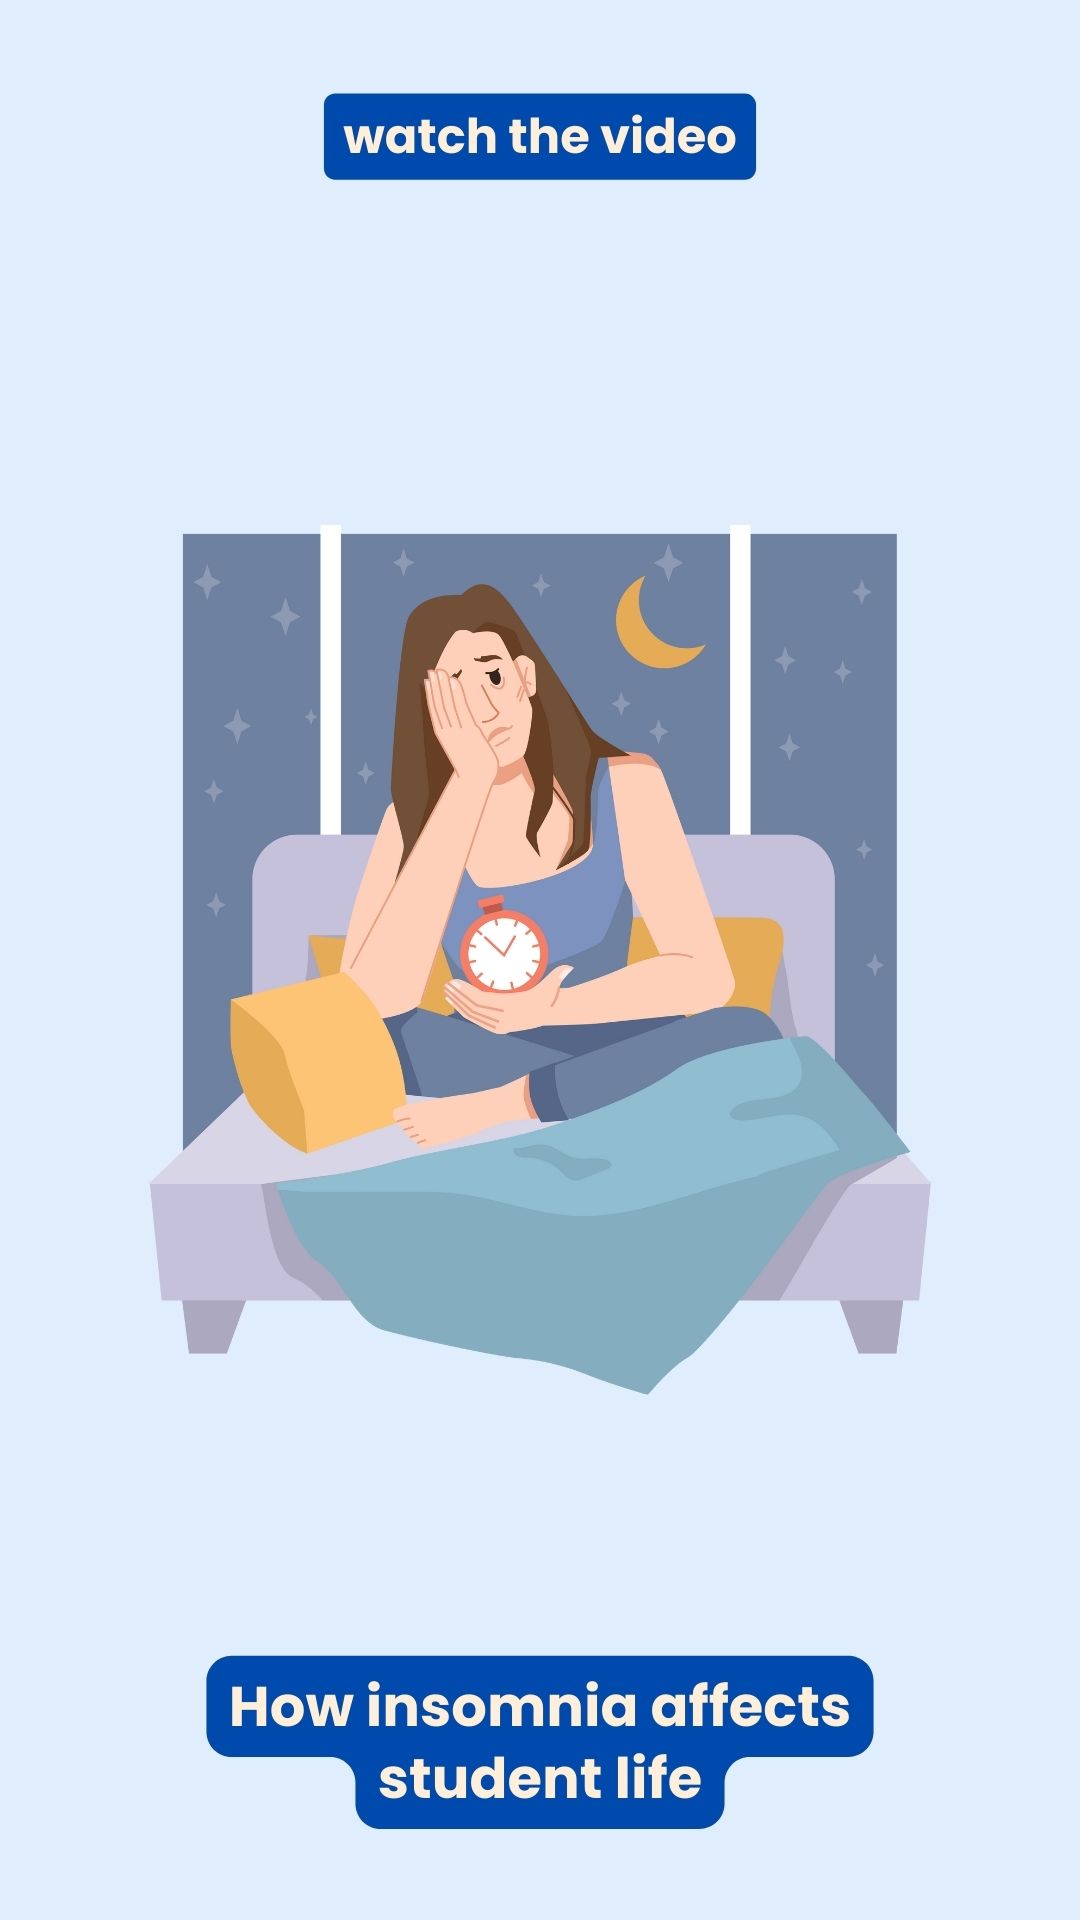 How insomnia affects student life